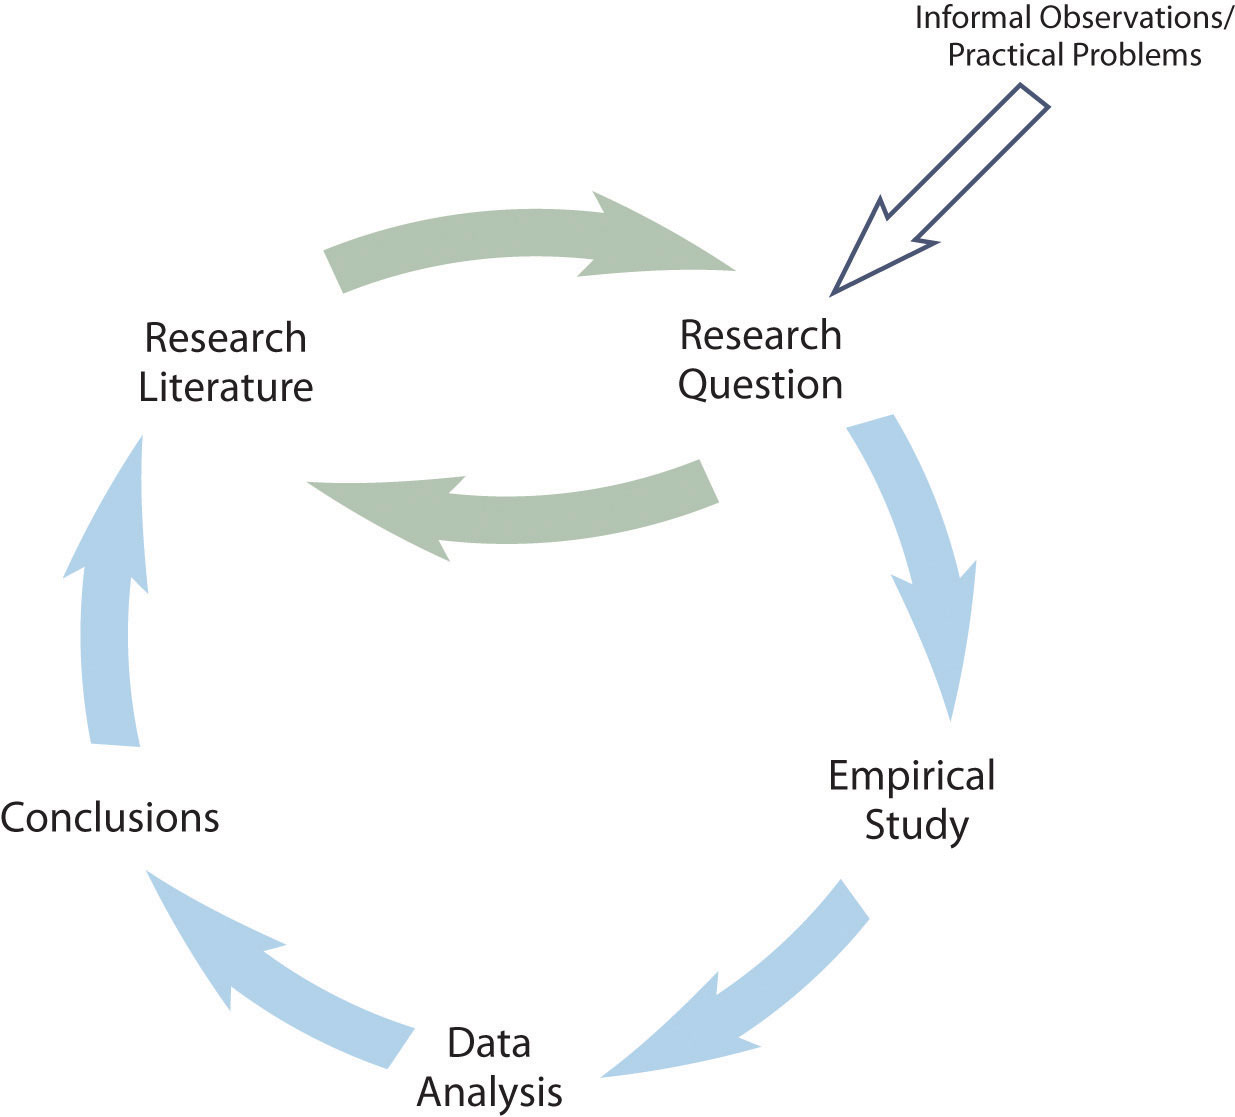 Methods for a psychology literature review